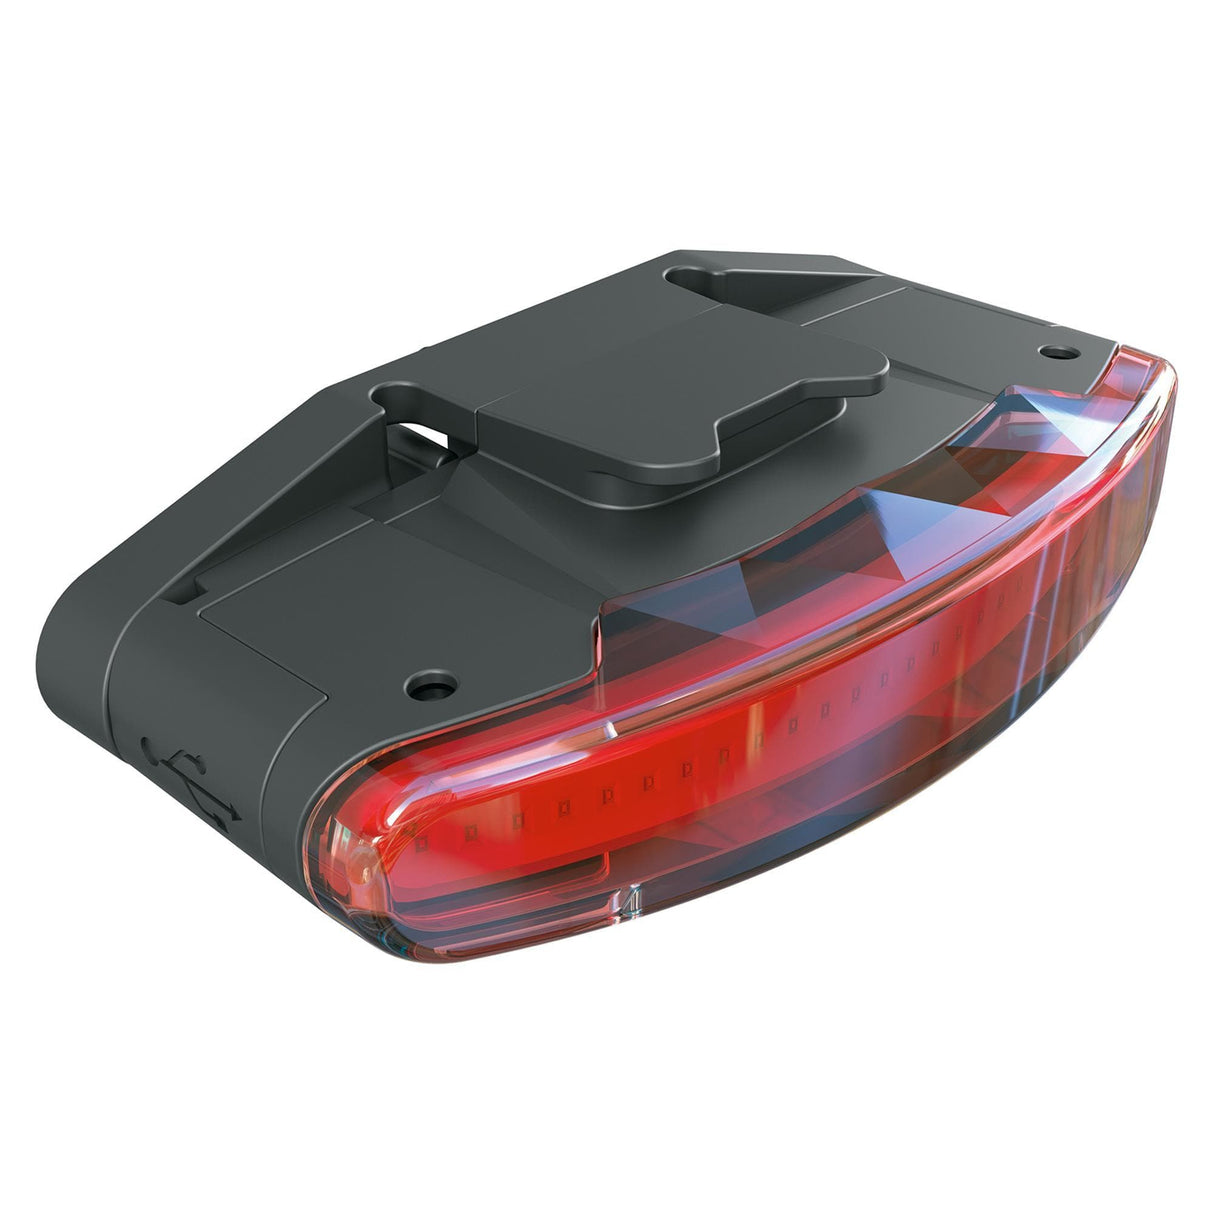 Sks Infinity Universal Rear Light - With Flashing Mode: